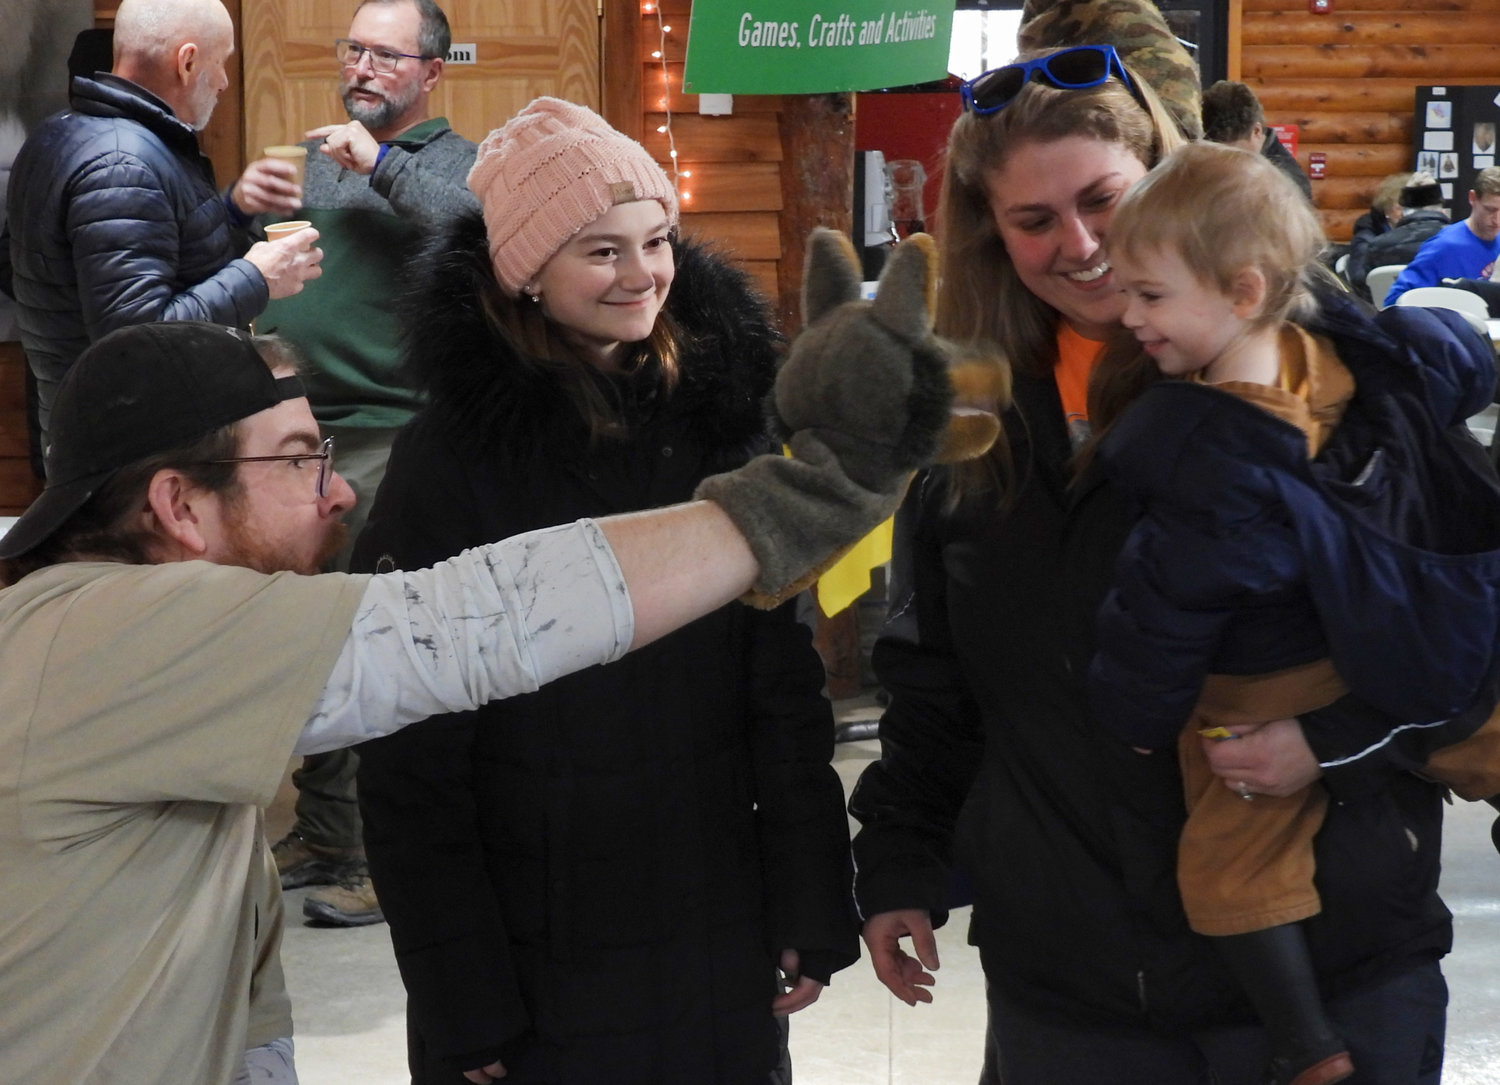 GSC Environmental Educator Jack Silky makes two-year-old Colton Mcardell laugh and smile while he's held by his mother Amanda and his Aunt Isabella Bonaventura looks on.